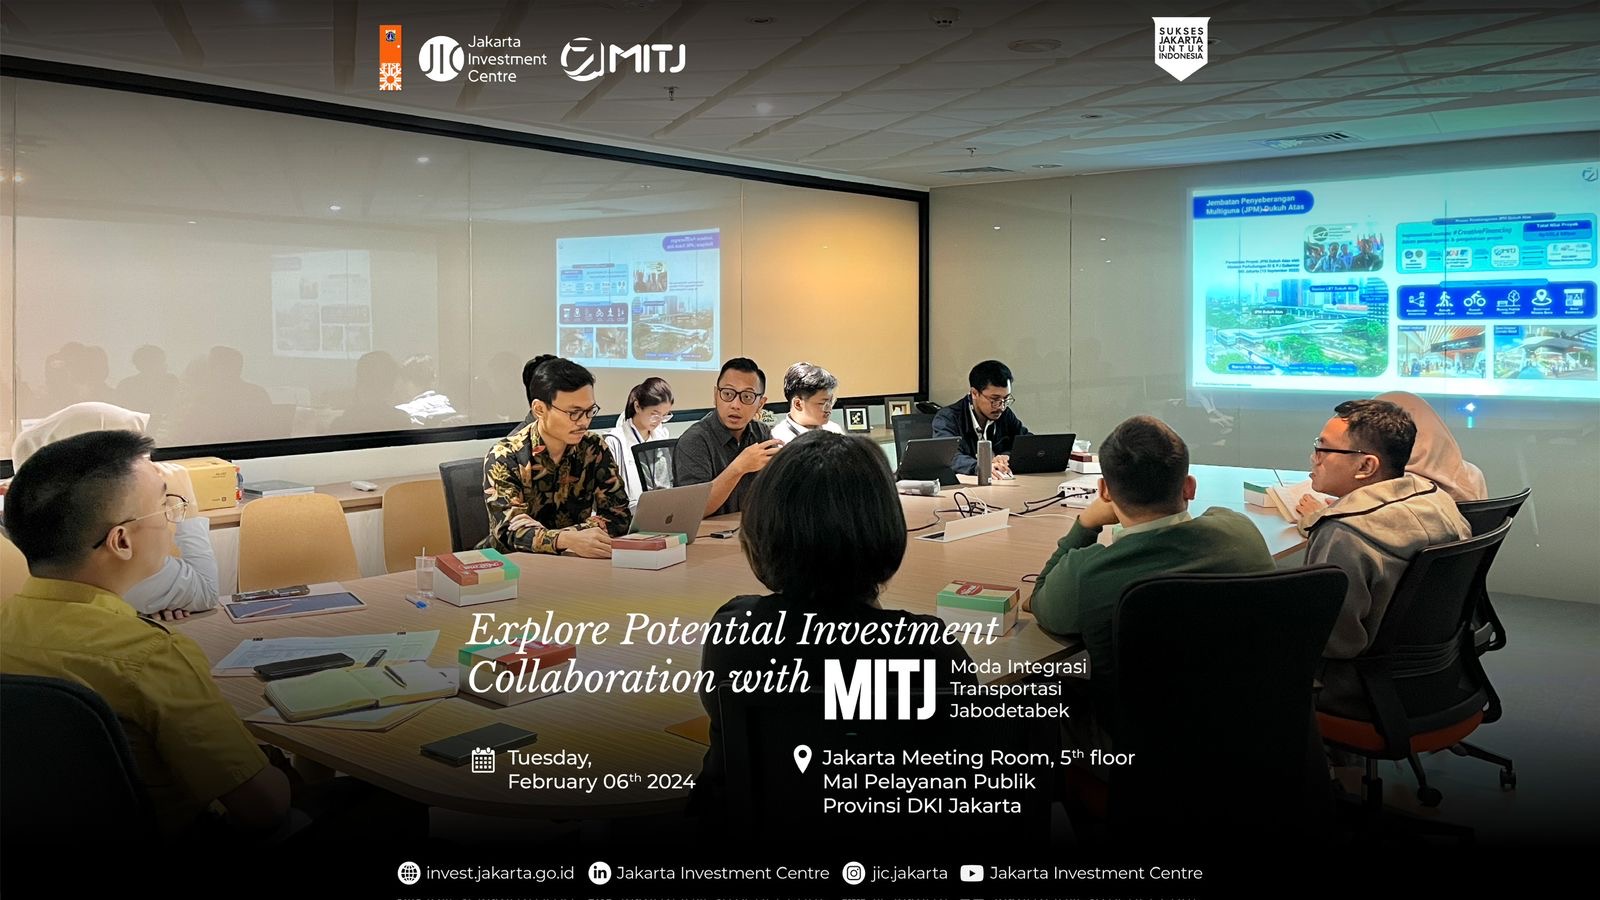 Explore Potential Investment Collaboration with MITJ